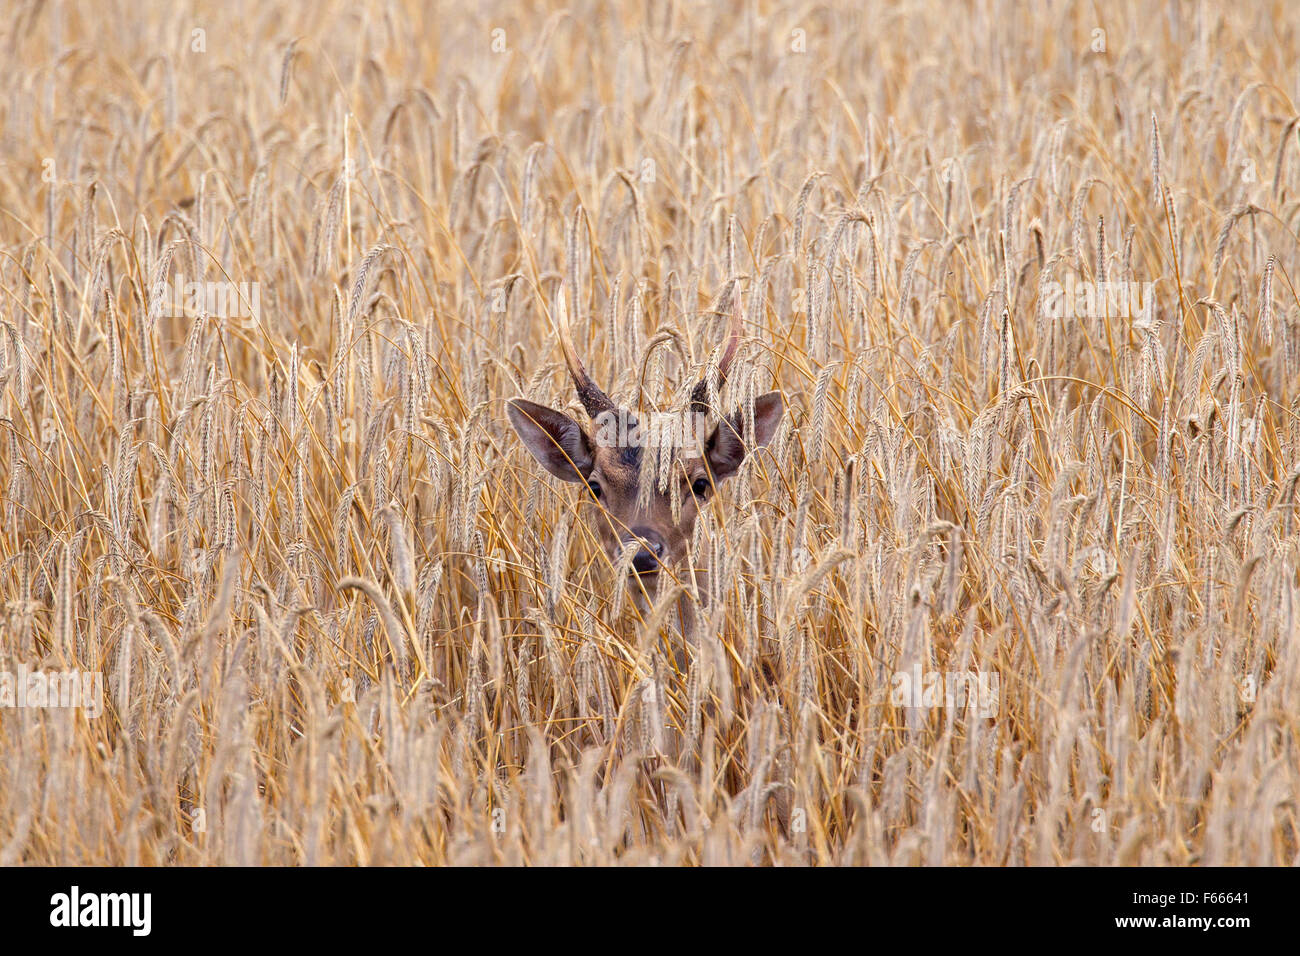 Fallow deer (Dama dama) young buck with small antlers in cornfield in summer Stock Photo